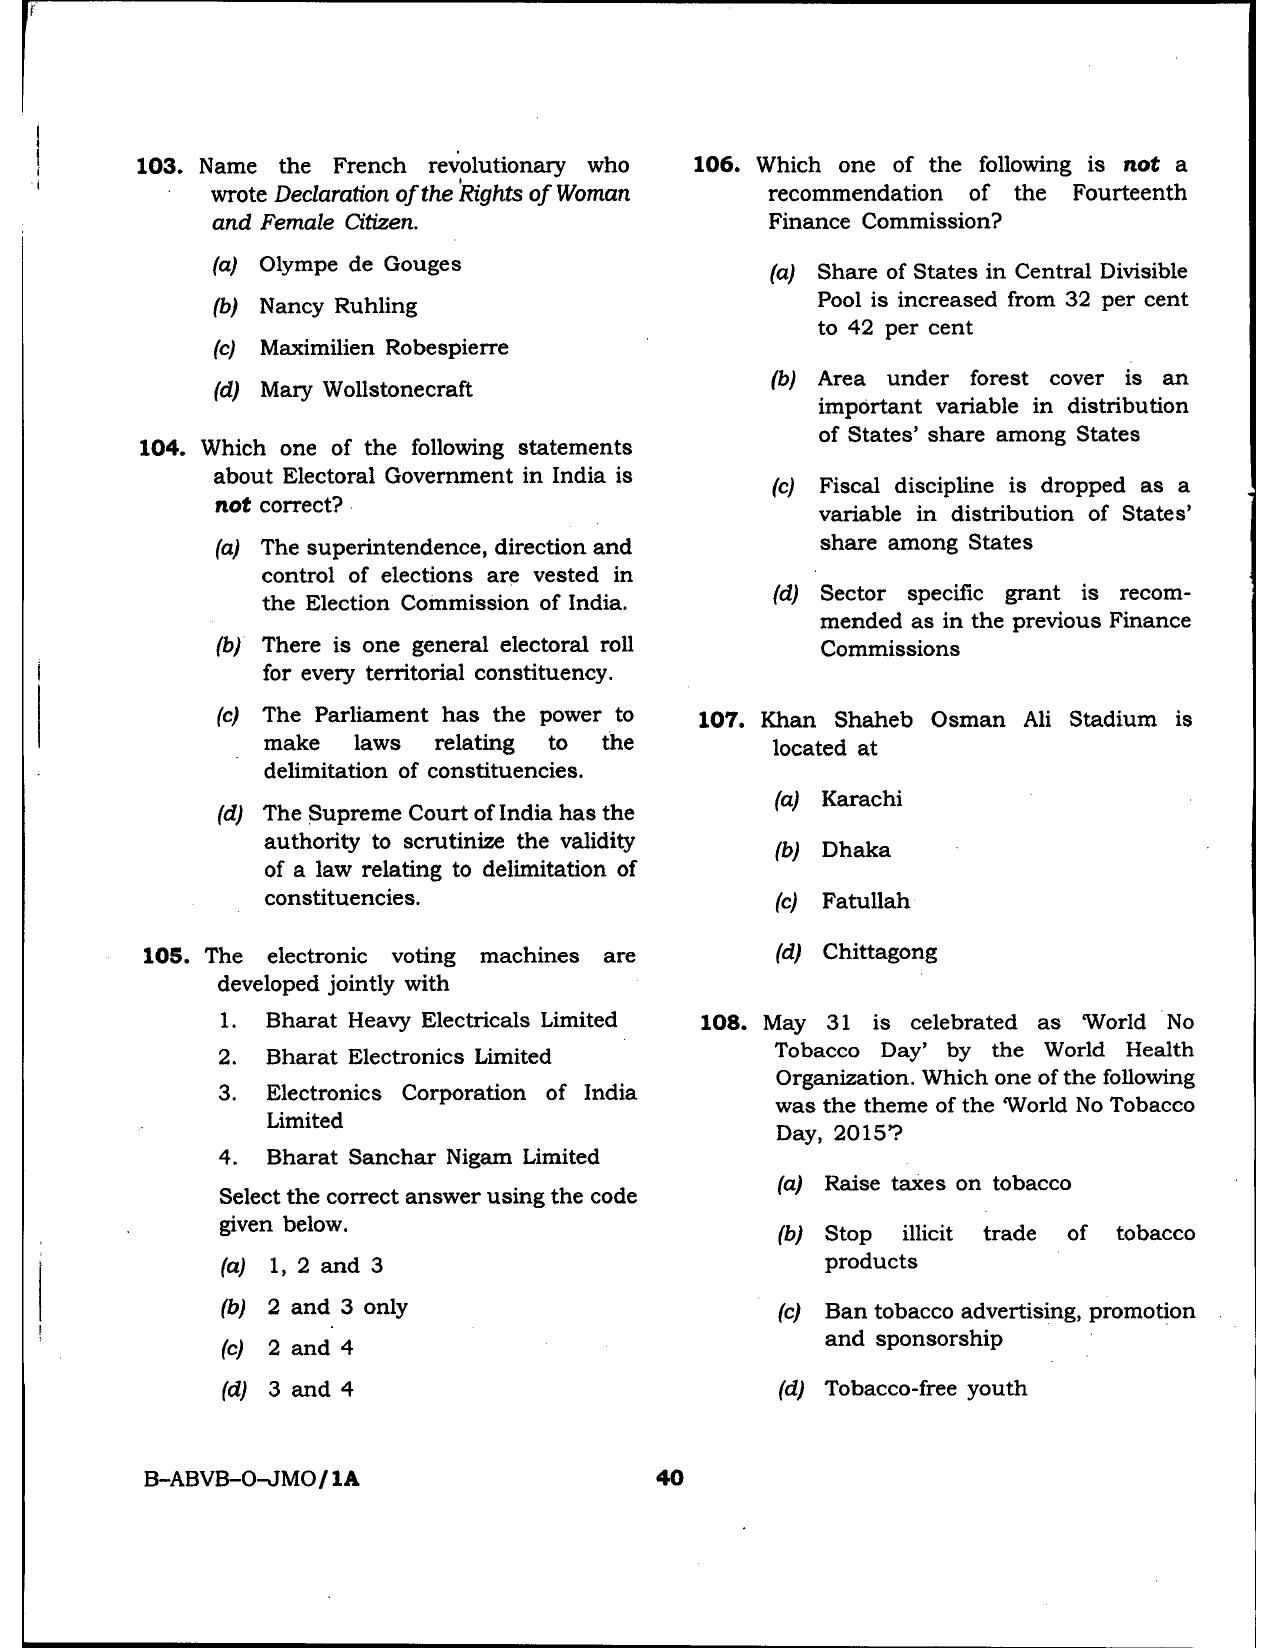 HPSSSB Fitter Model Papers: General Knowledge - Page 40